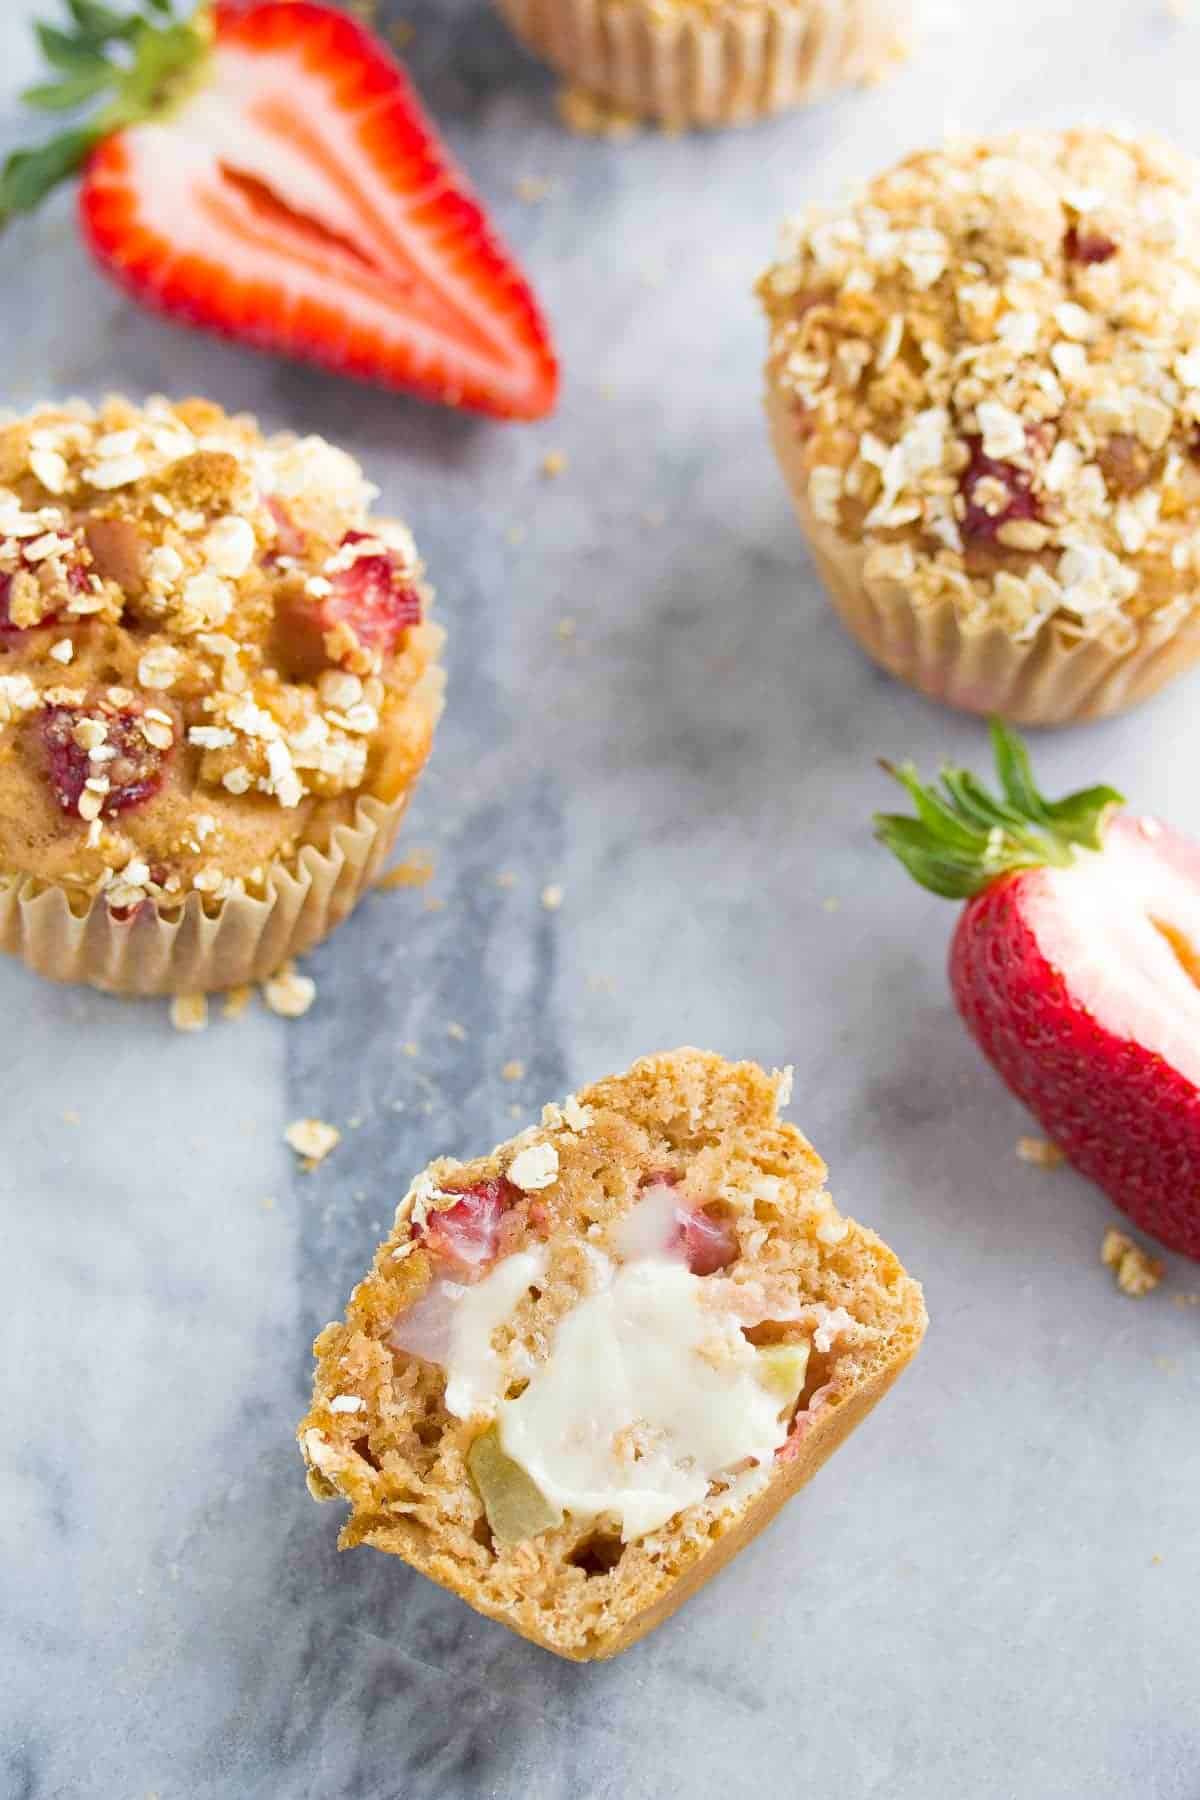 These strawberry apple crumble muffins will satisfy your muffin cravings while keeping things healthy. No butter or oil, half whole wheat flour, and only 140 calories each!